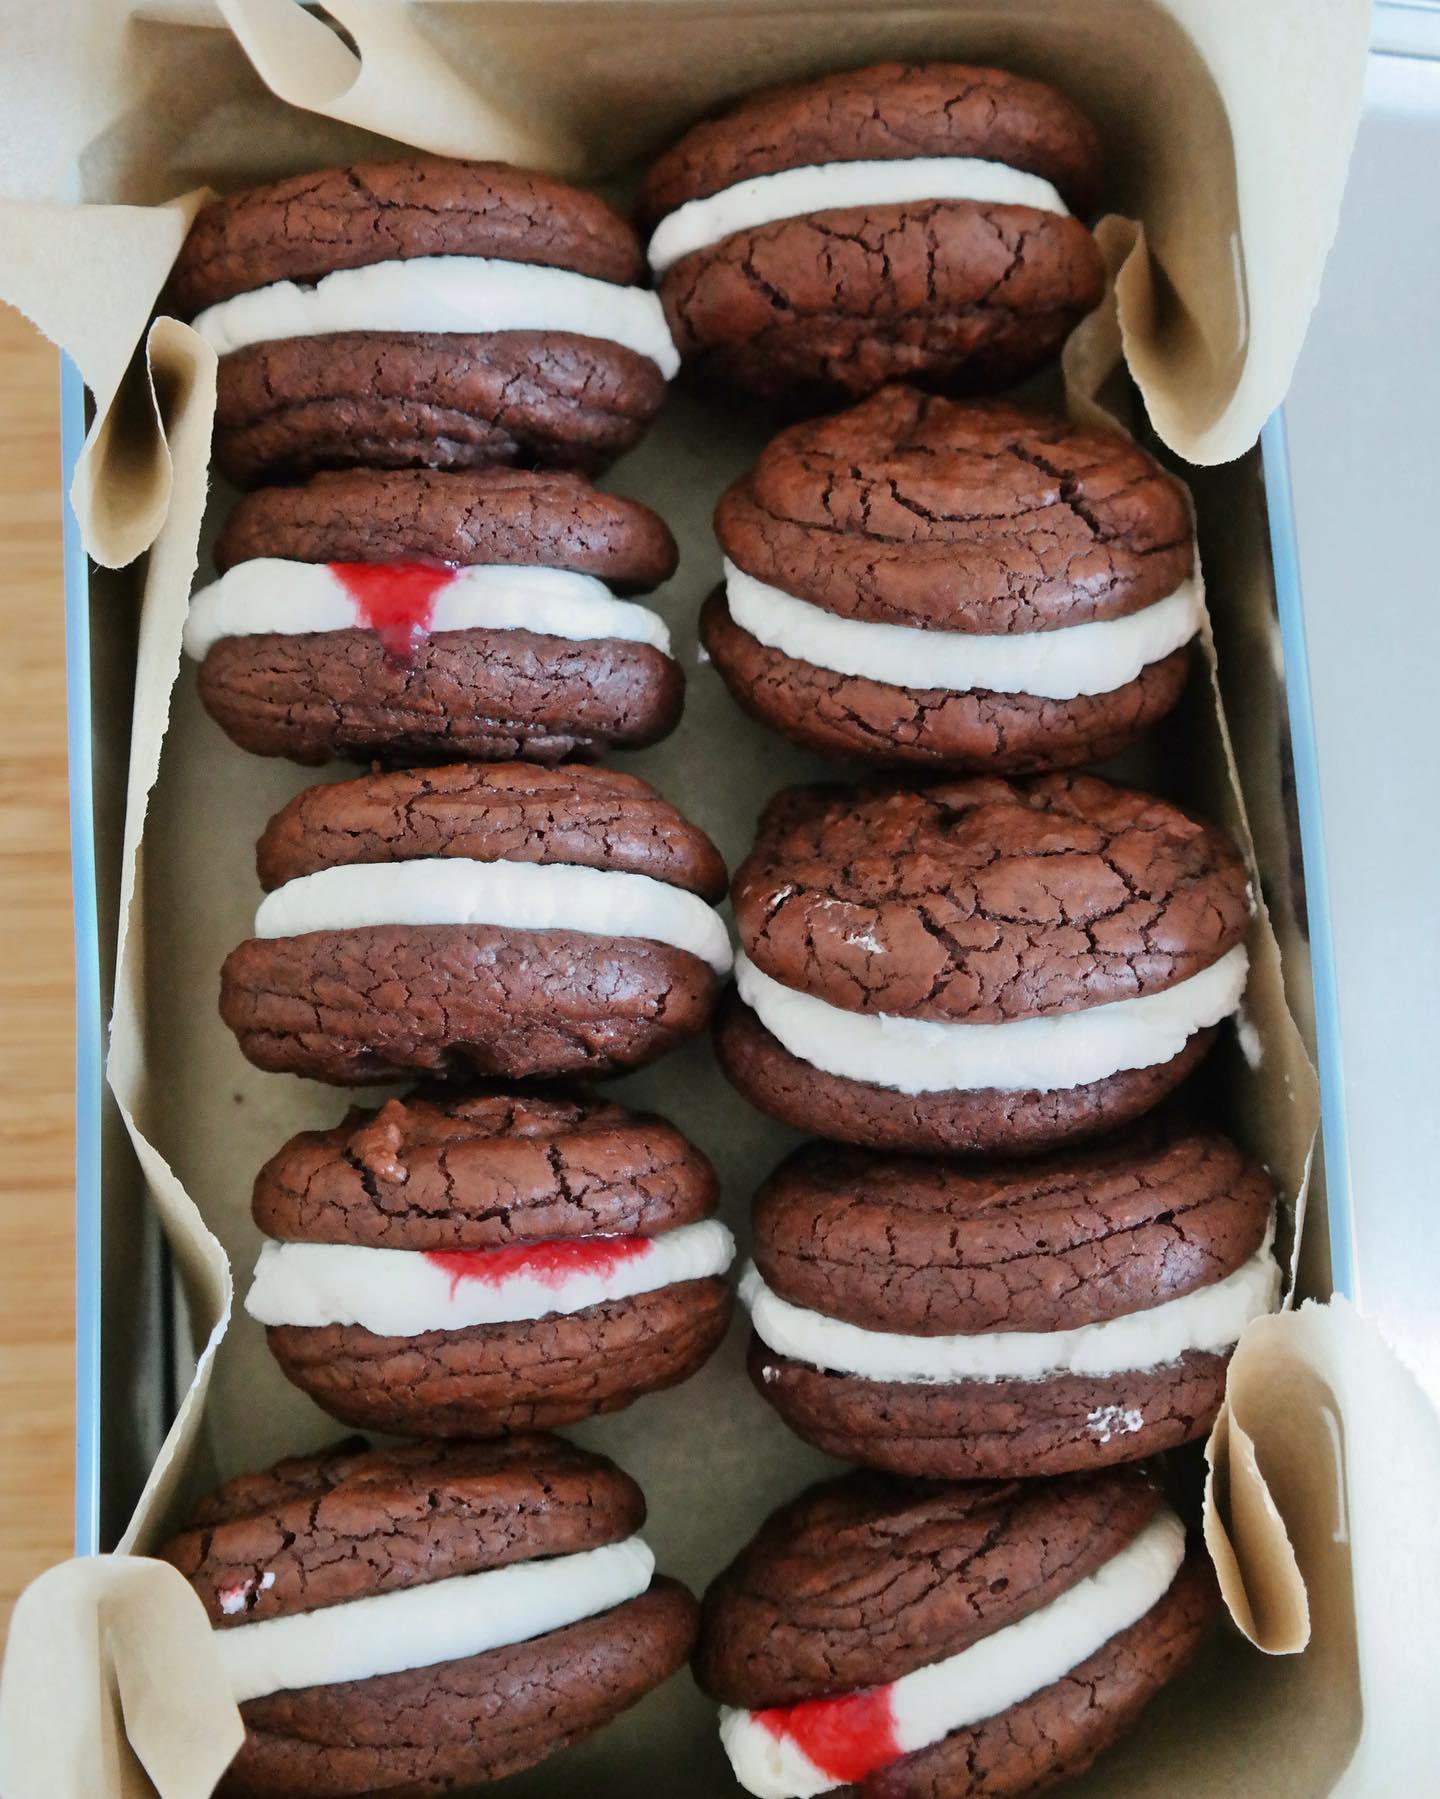 Brownie cookie sandwiches with raspberry filling 🥰😋
.
.
.
.
#baking #homebaking #homebaked #bakinglove #bakingtime #bakingfromscratch #chocolate #brownies #brownie #cookies #browniecookies #yummy #yum #instagood #instadessert #delicious #sweet #sweettooth #food #foodblogger #foodblog